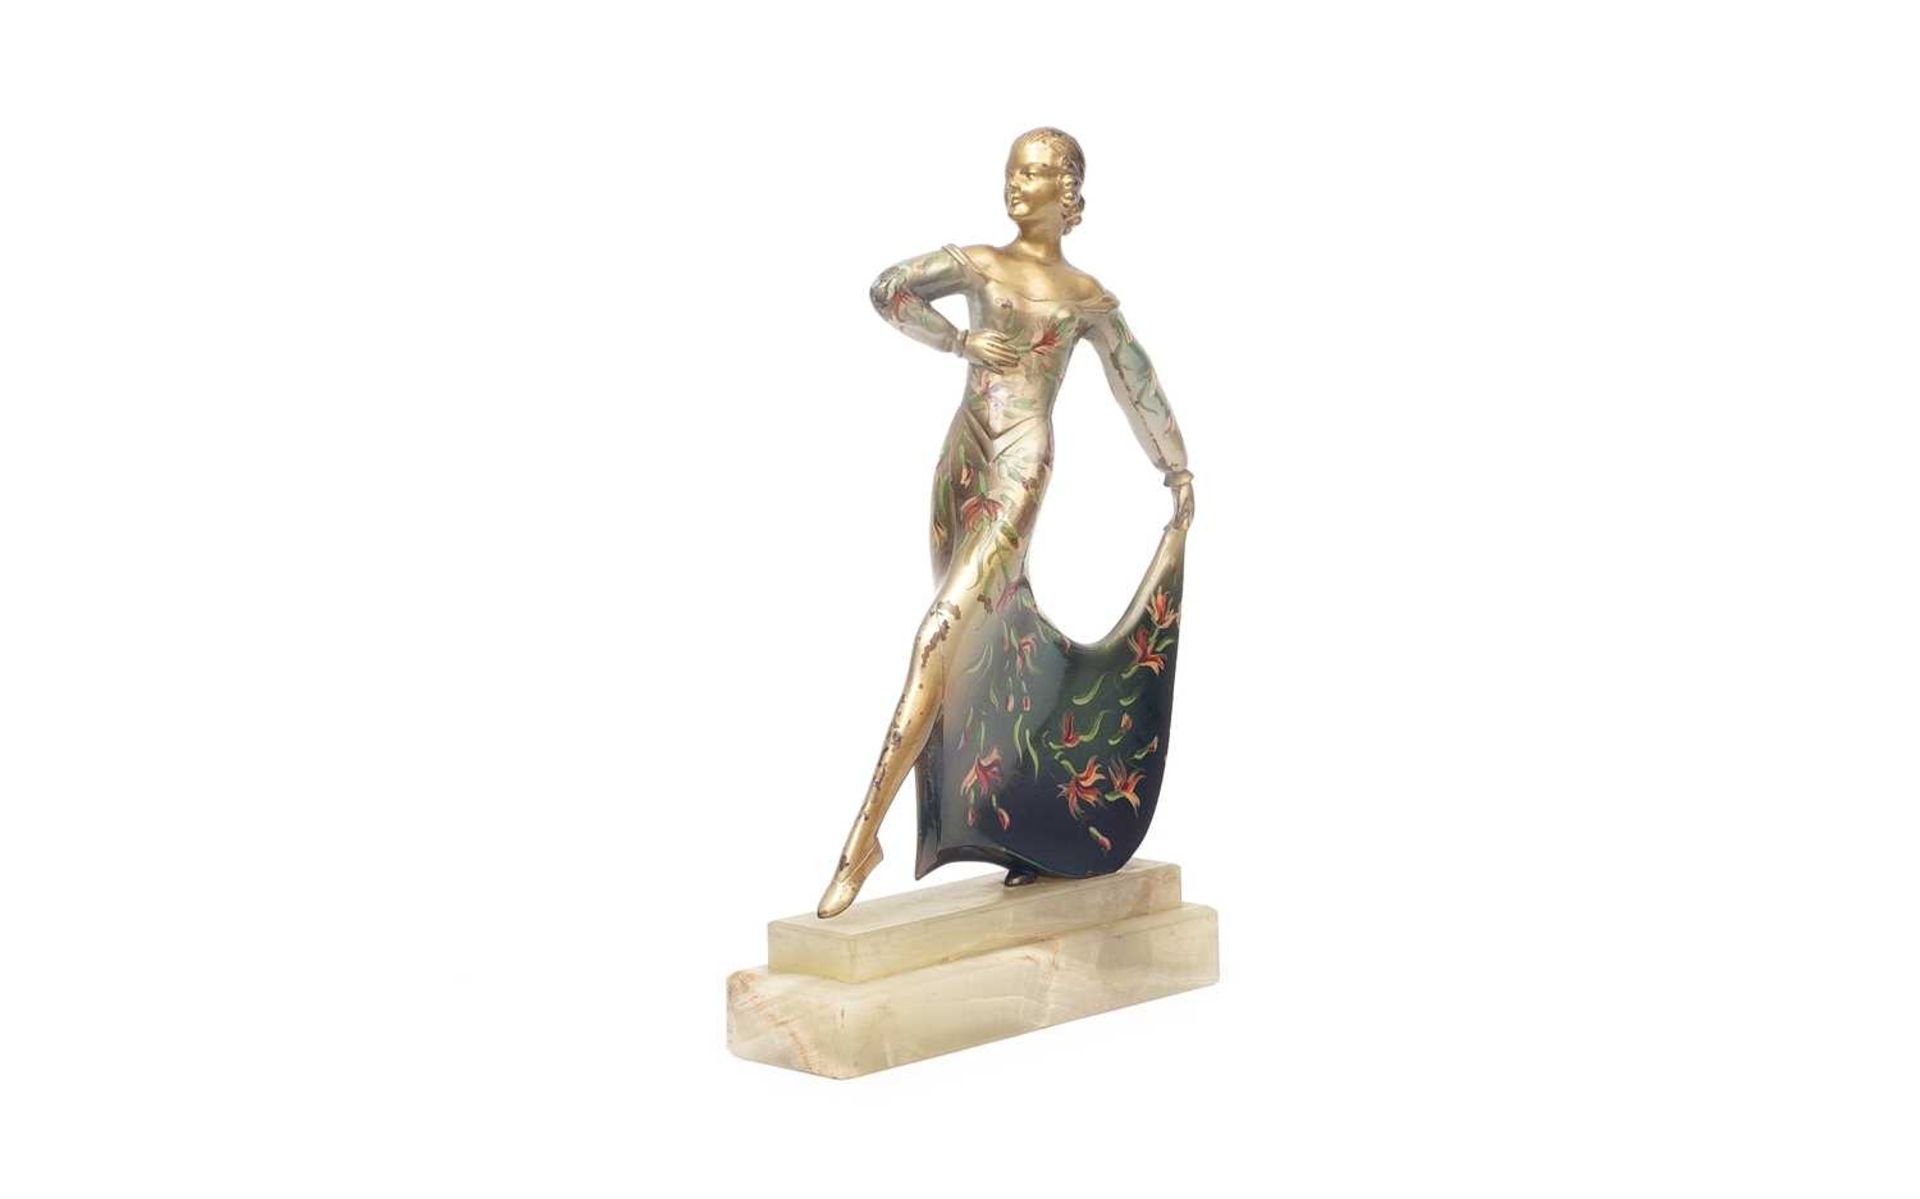 AN ART DECO PERIOD COLD PAINTED BRONZE AND ONYX FIGURE OF A DANCING GIRL - Image 2 of 4